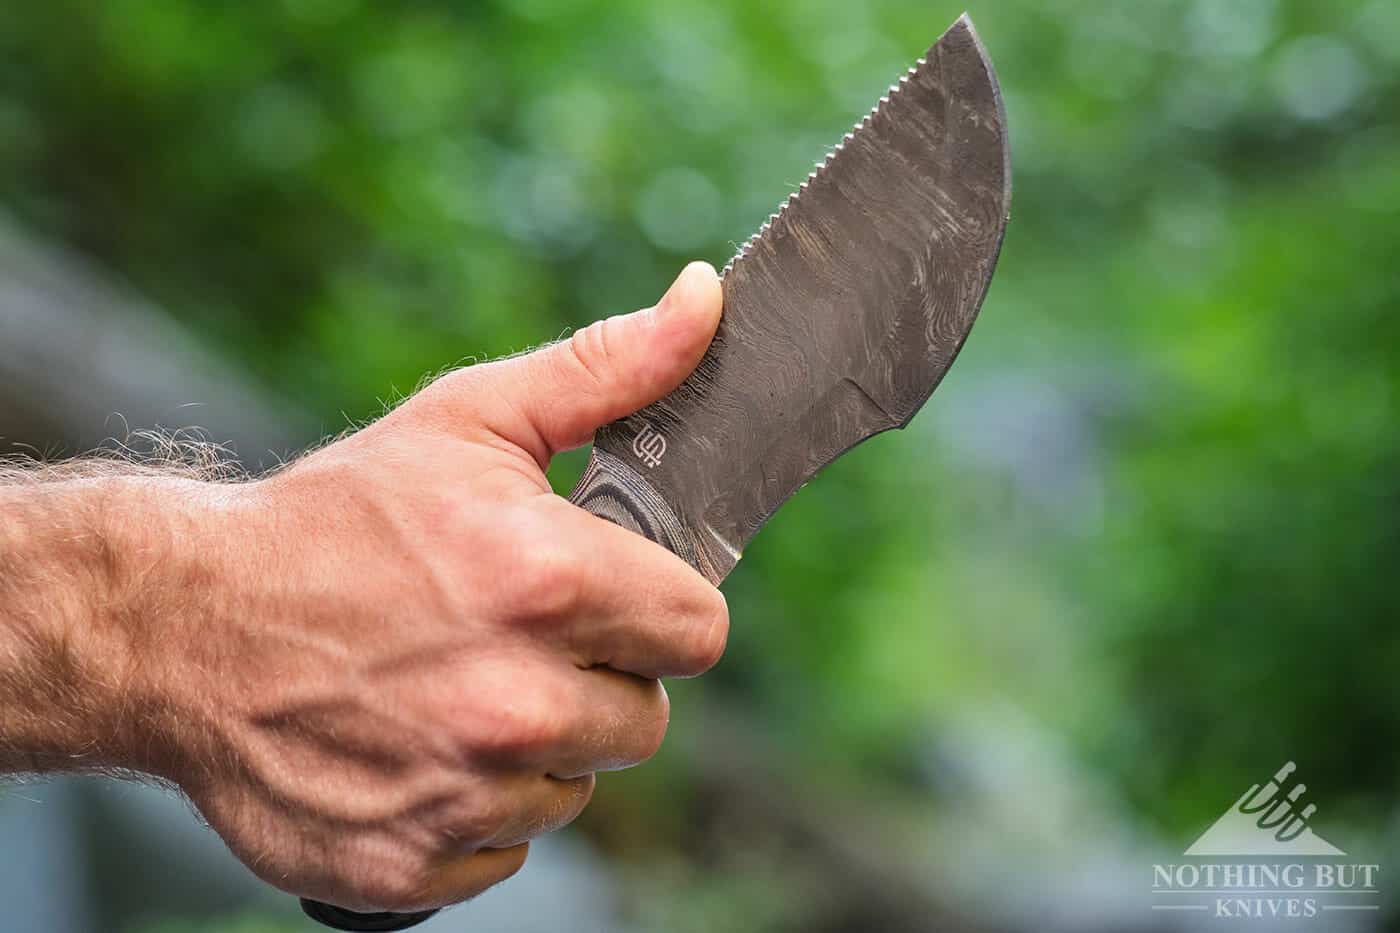 Grip with thumb on the spine of the knife for added support. 